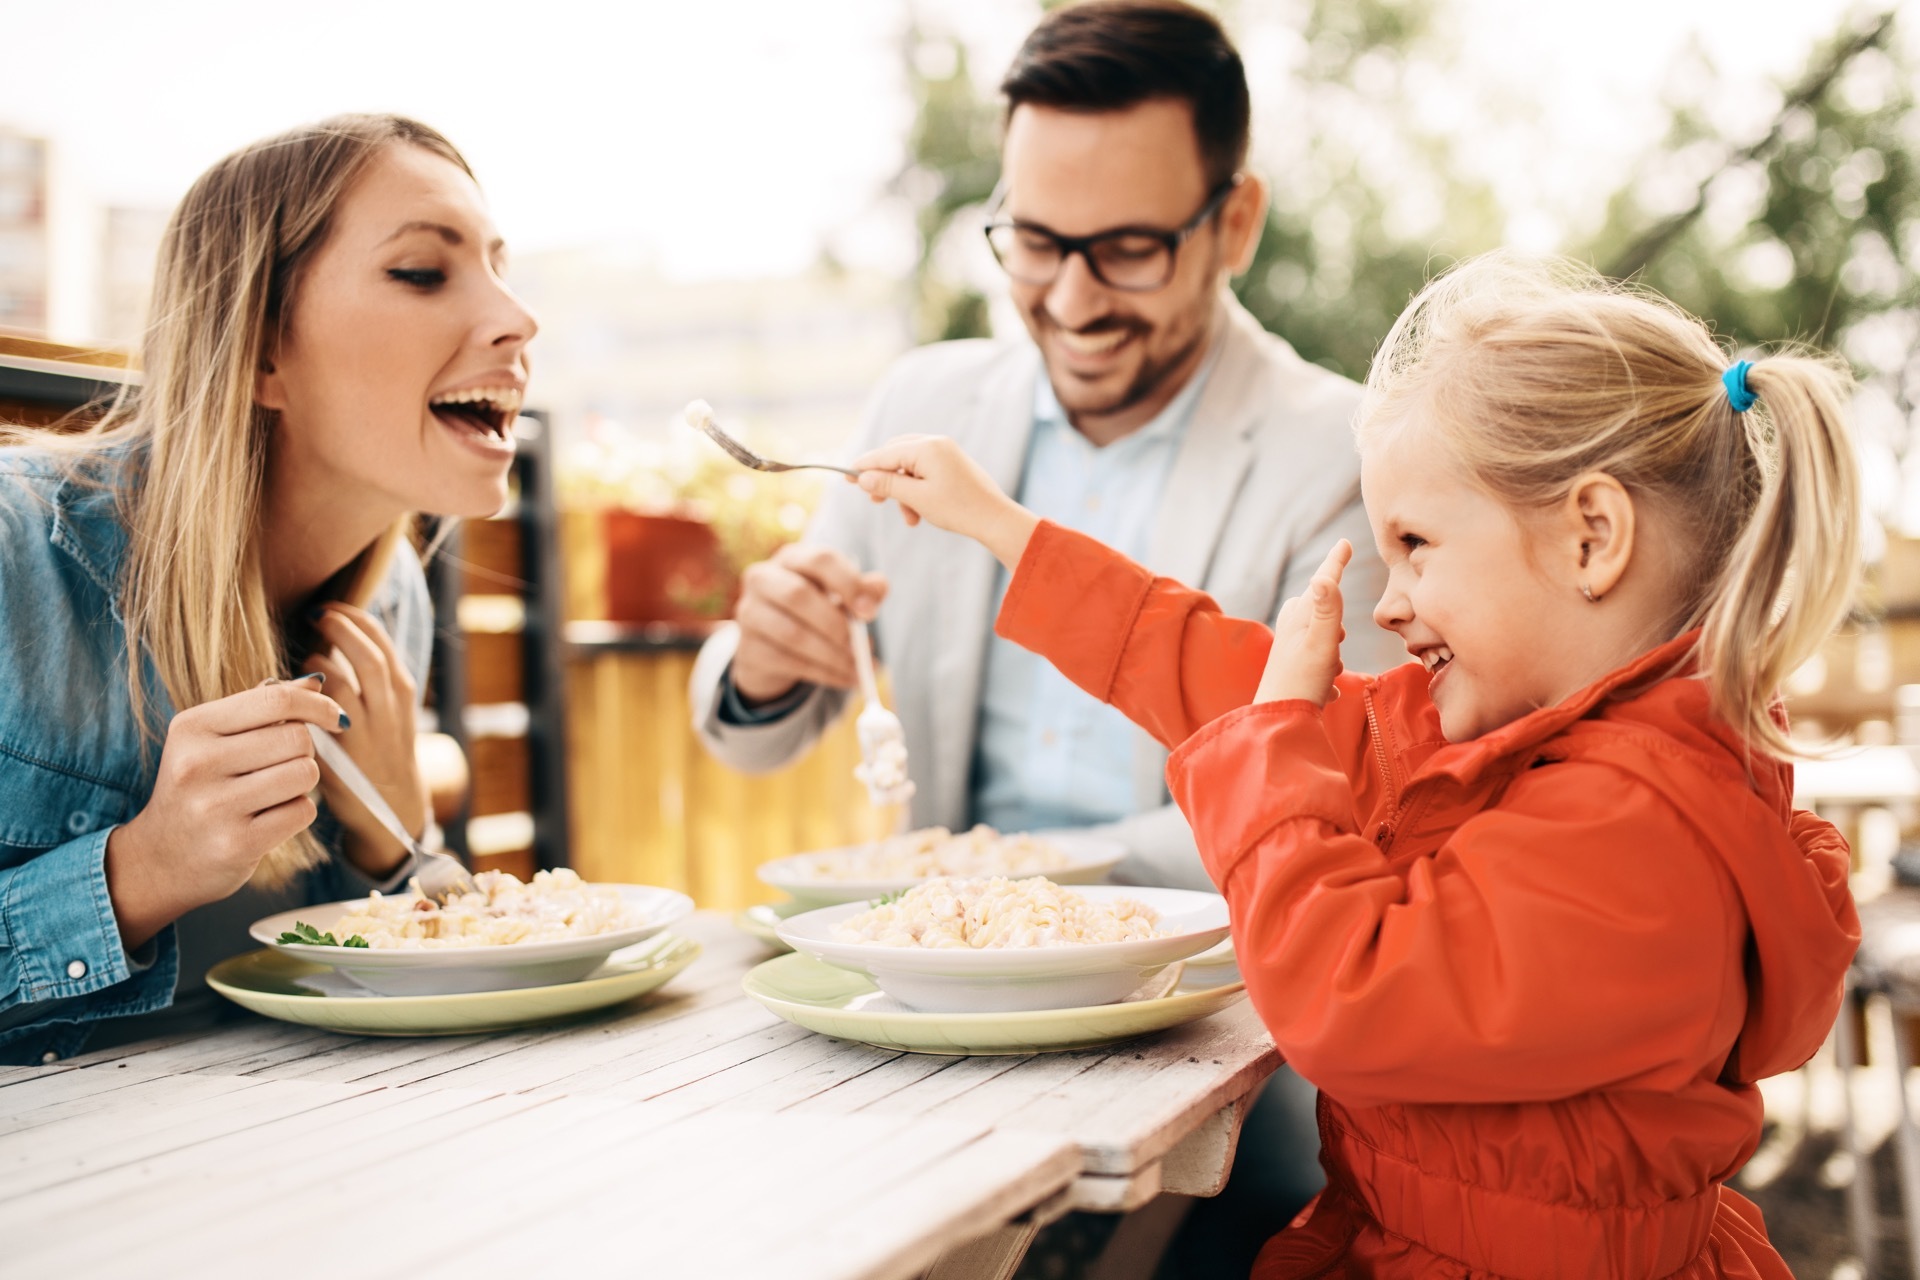 Three people sharing a meal of pasta; our Allergy Compensation Solicitors discuss No Win No Fee compensation claims for coeliac allergy claims.